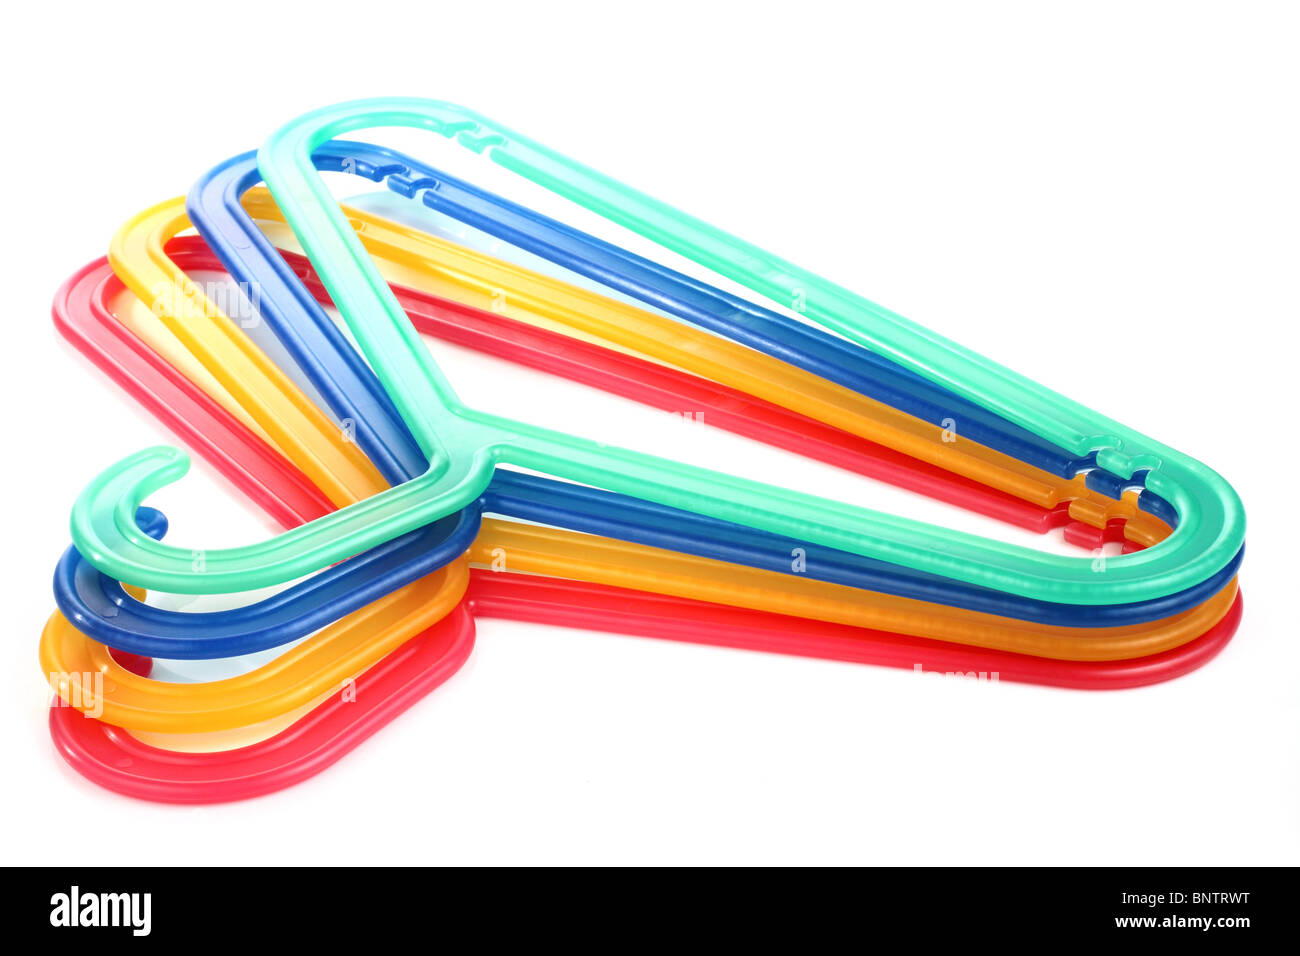 Coloured plastic hangers on a white background Stock Photo